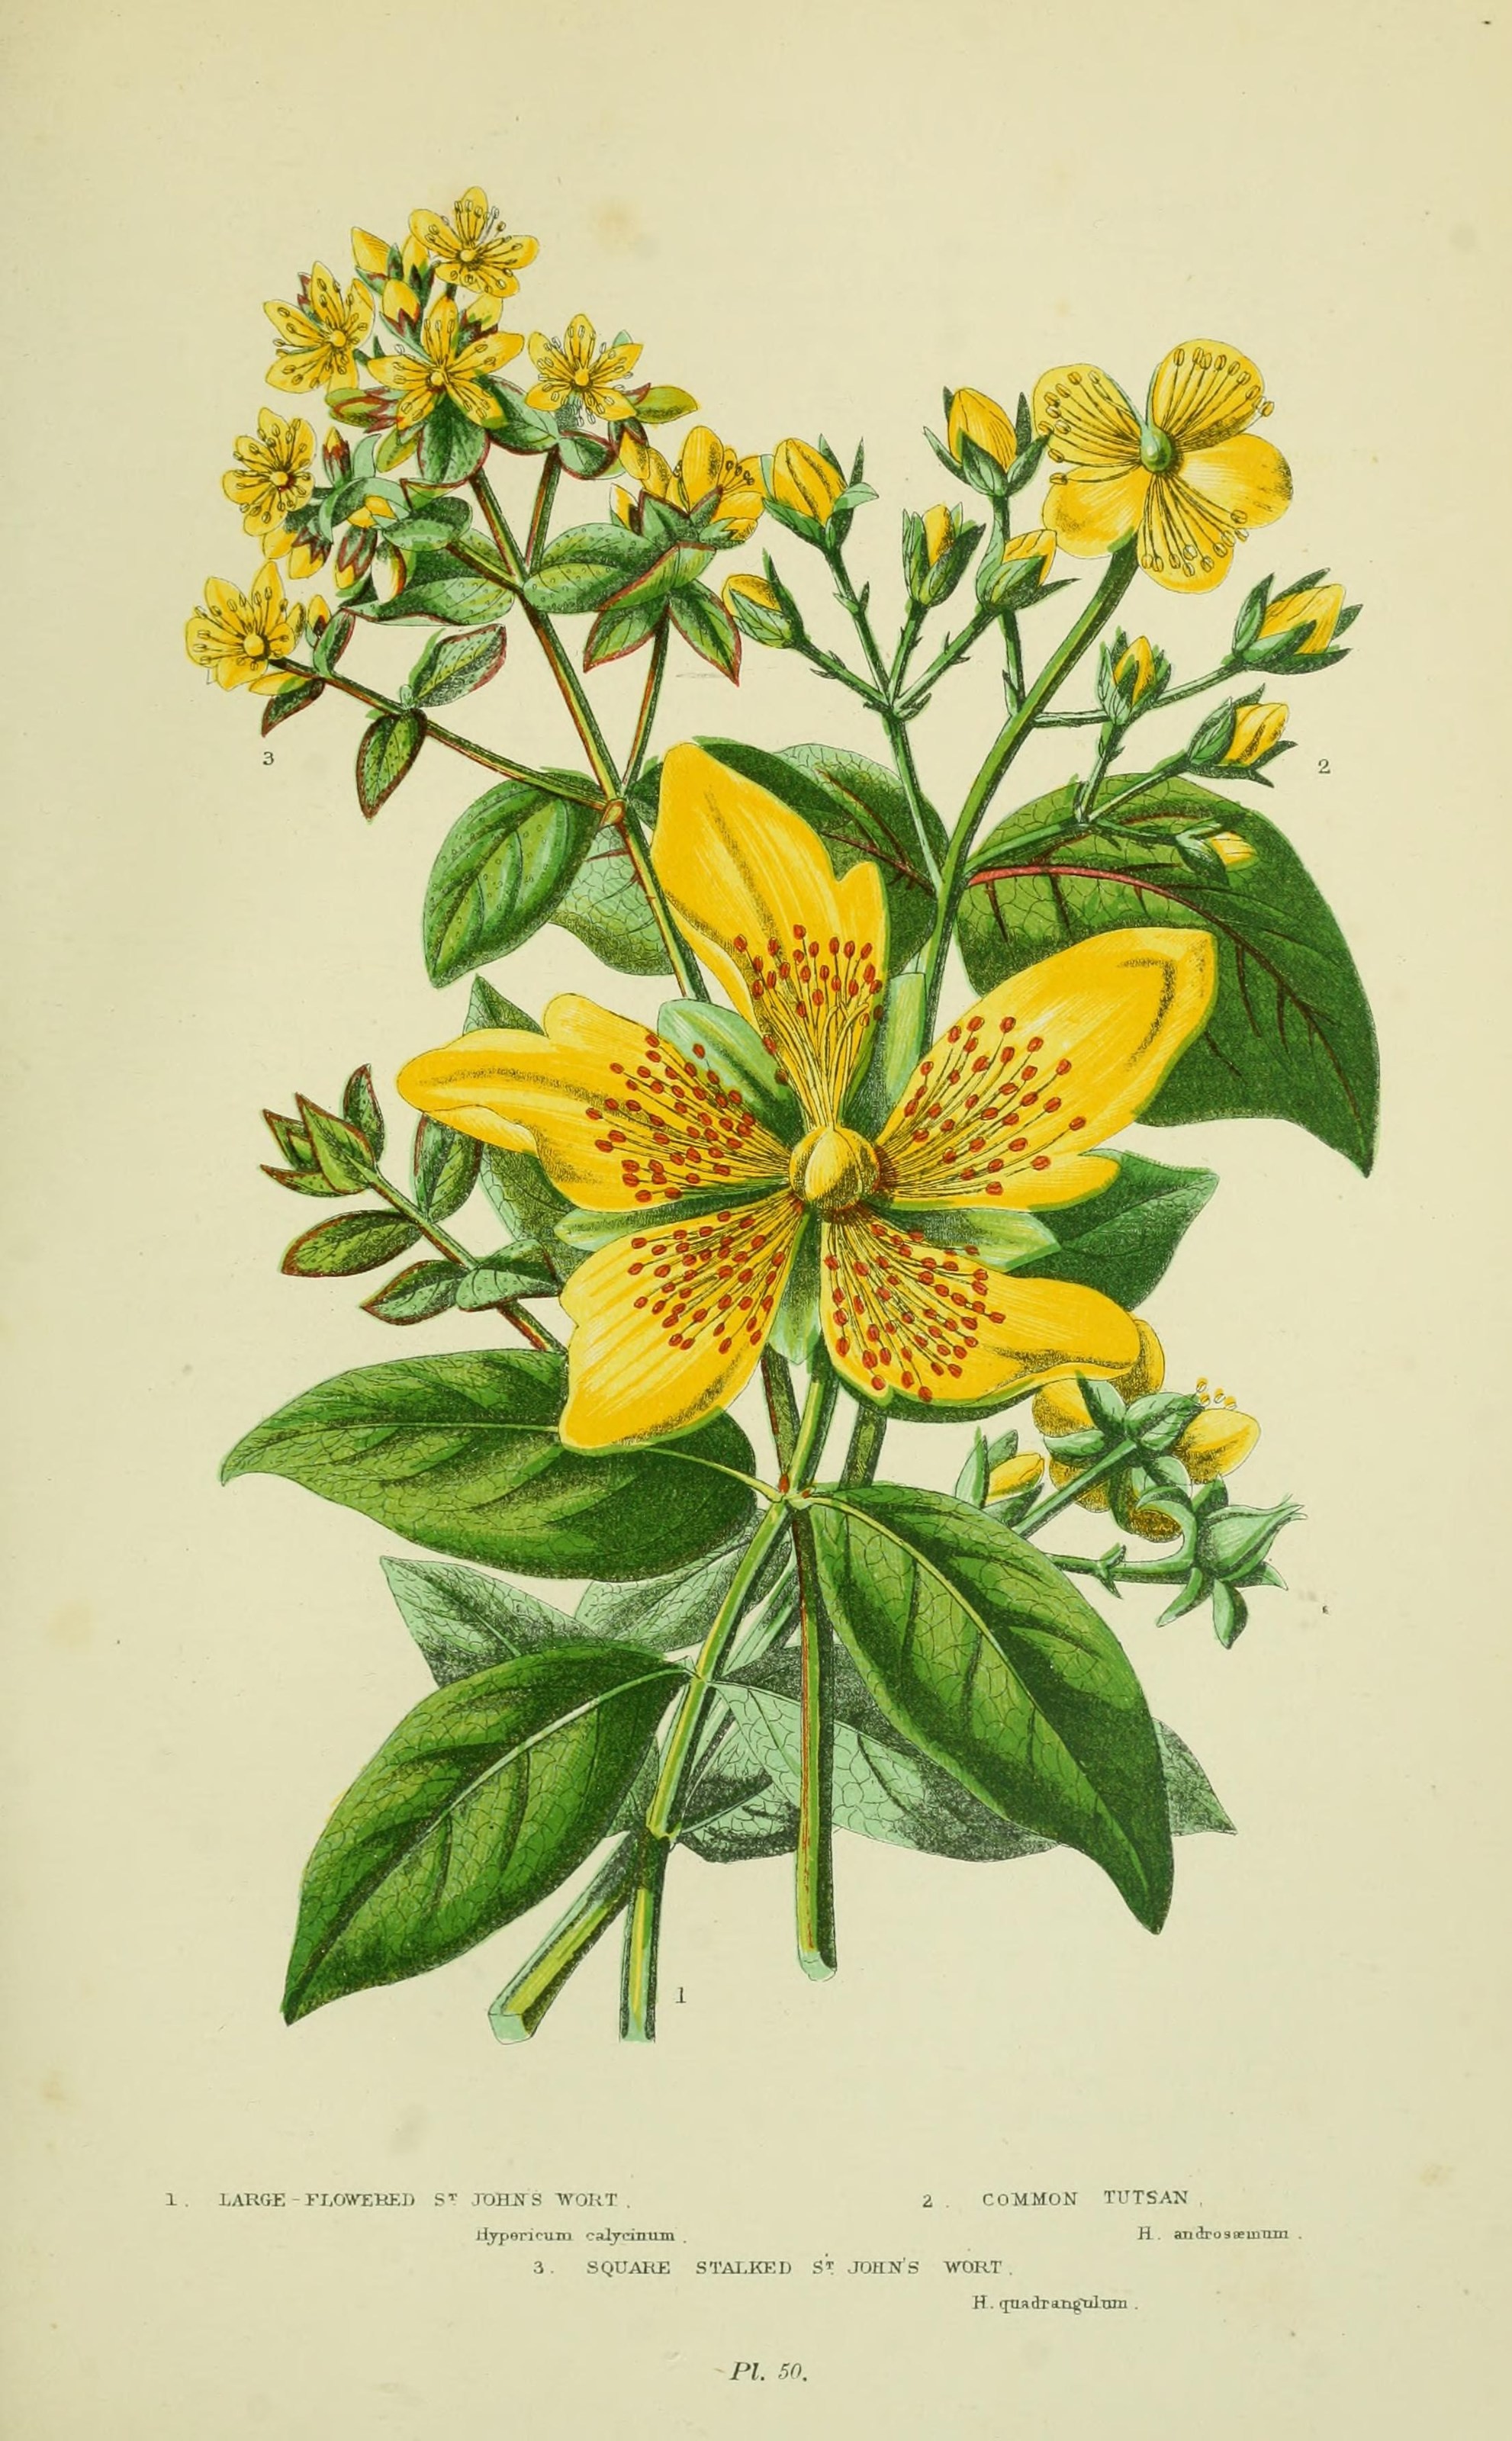 Early British illustration of St. John's Wort, circa 1905. By Pratt, Anne; Step, Edward [CC BY 2.0 or Public domain], via Wikimedia Commons